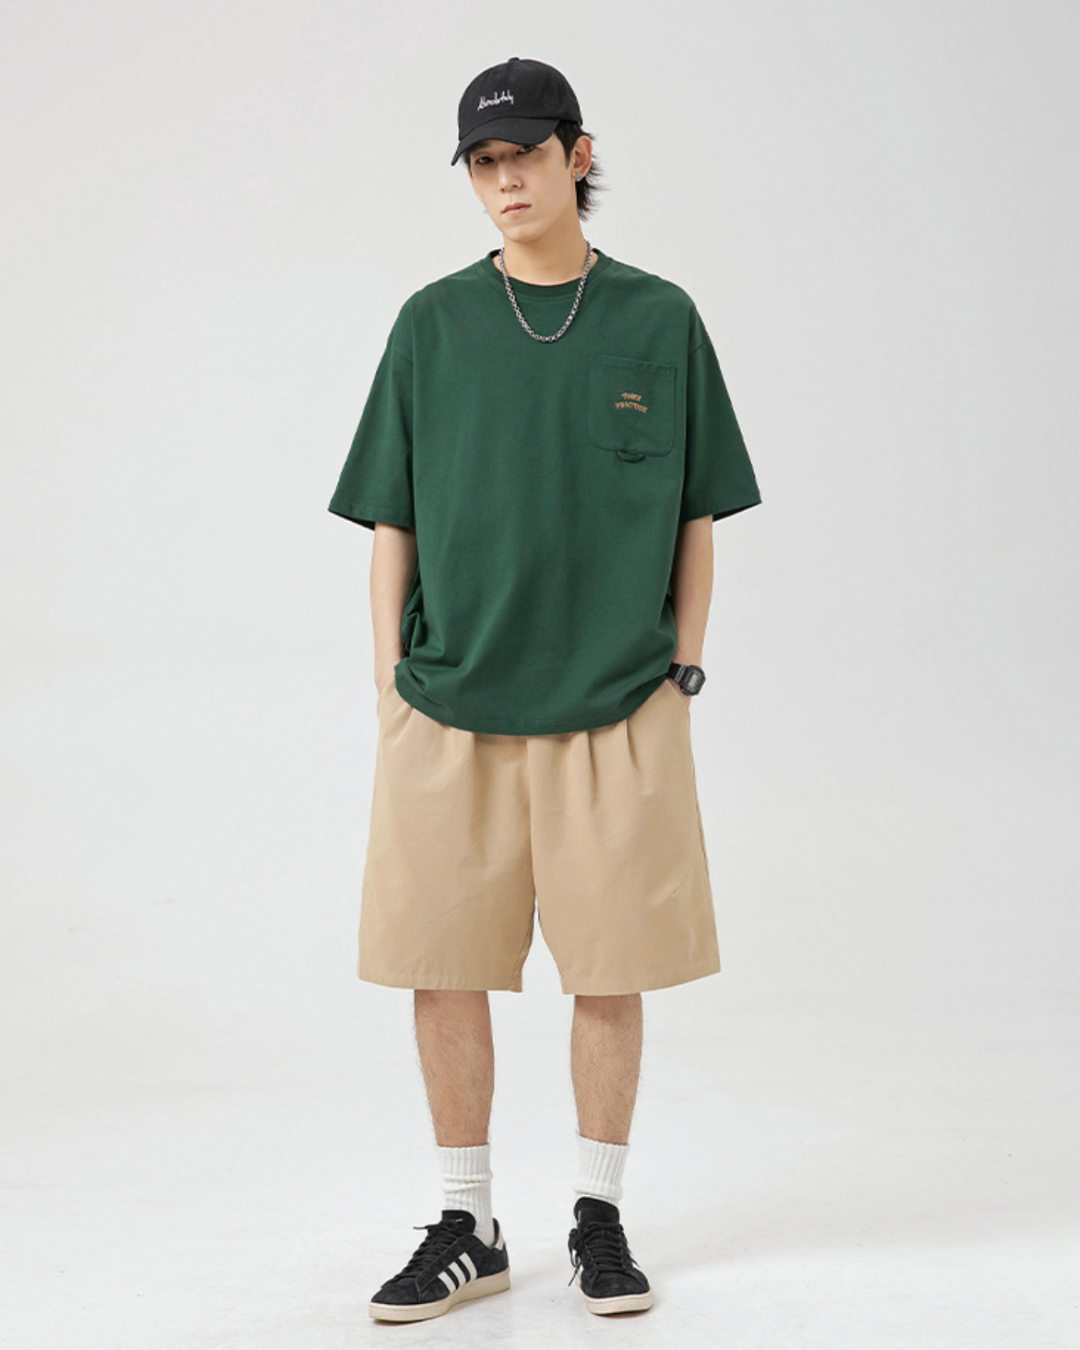 Times Practice Oversized Tee in Green